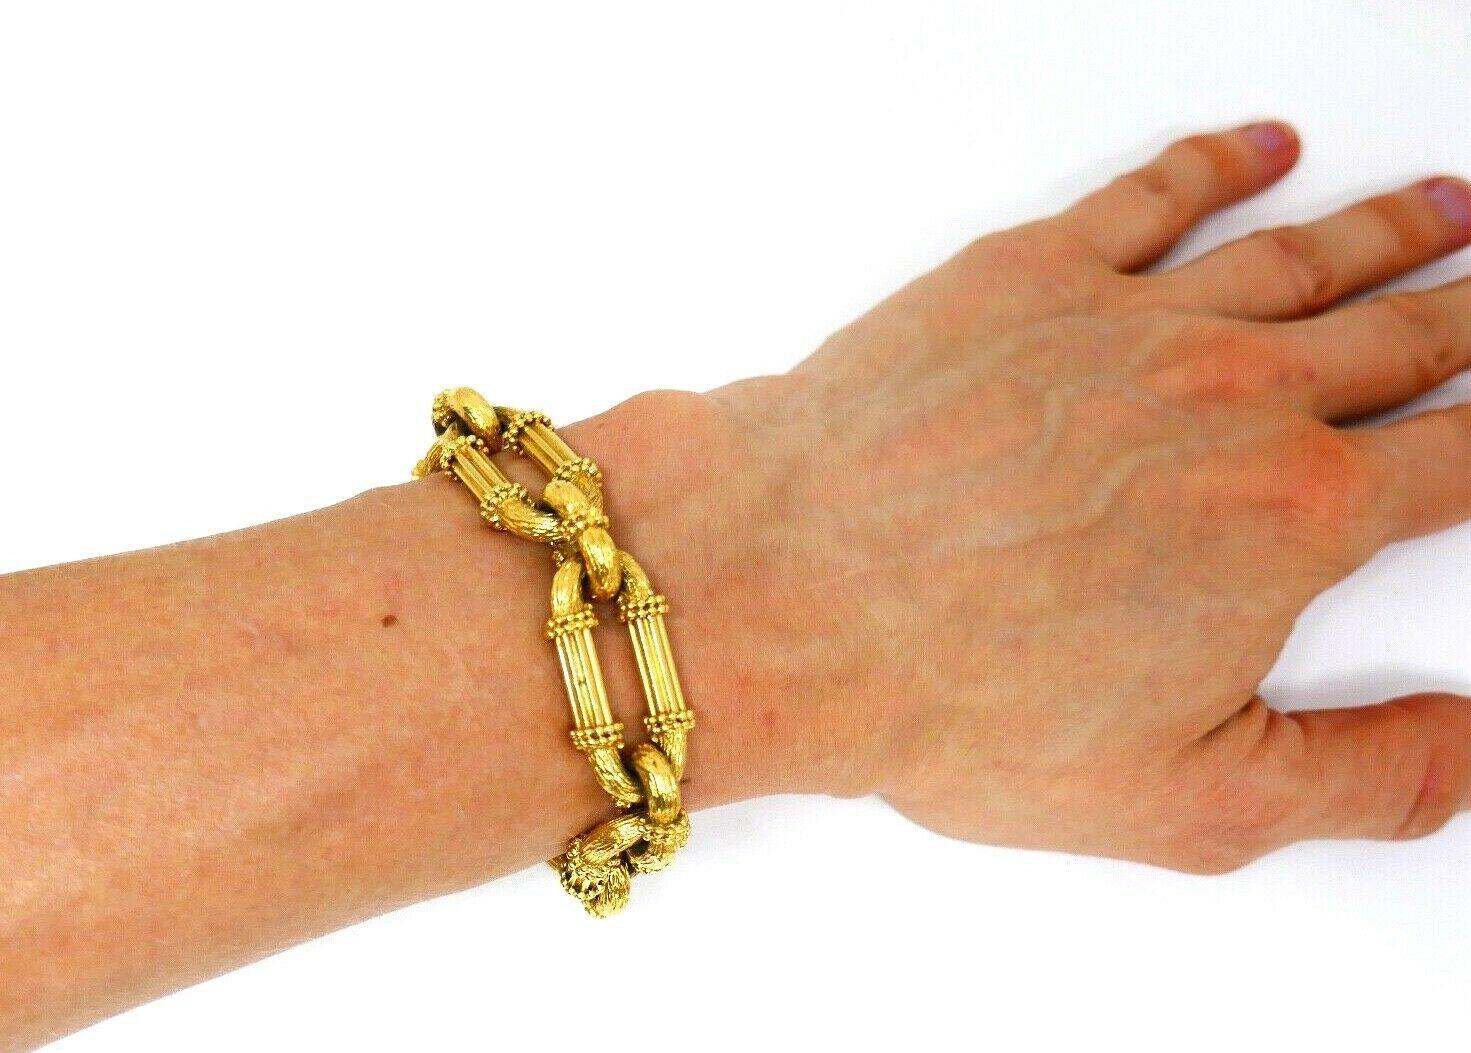 Gorgeous vintage chain bracelet made of 18k textured yellow gold. Stamped with a hallmark for 18k gold and a European maker's mark. 
Measurements: 3/16